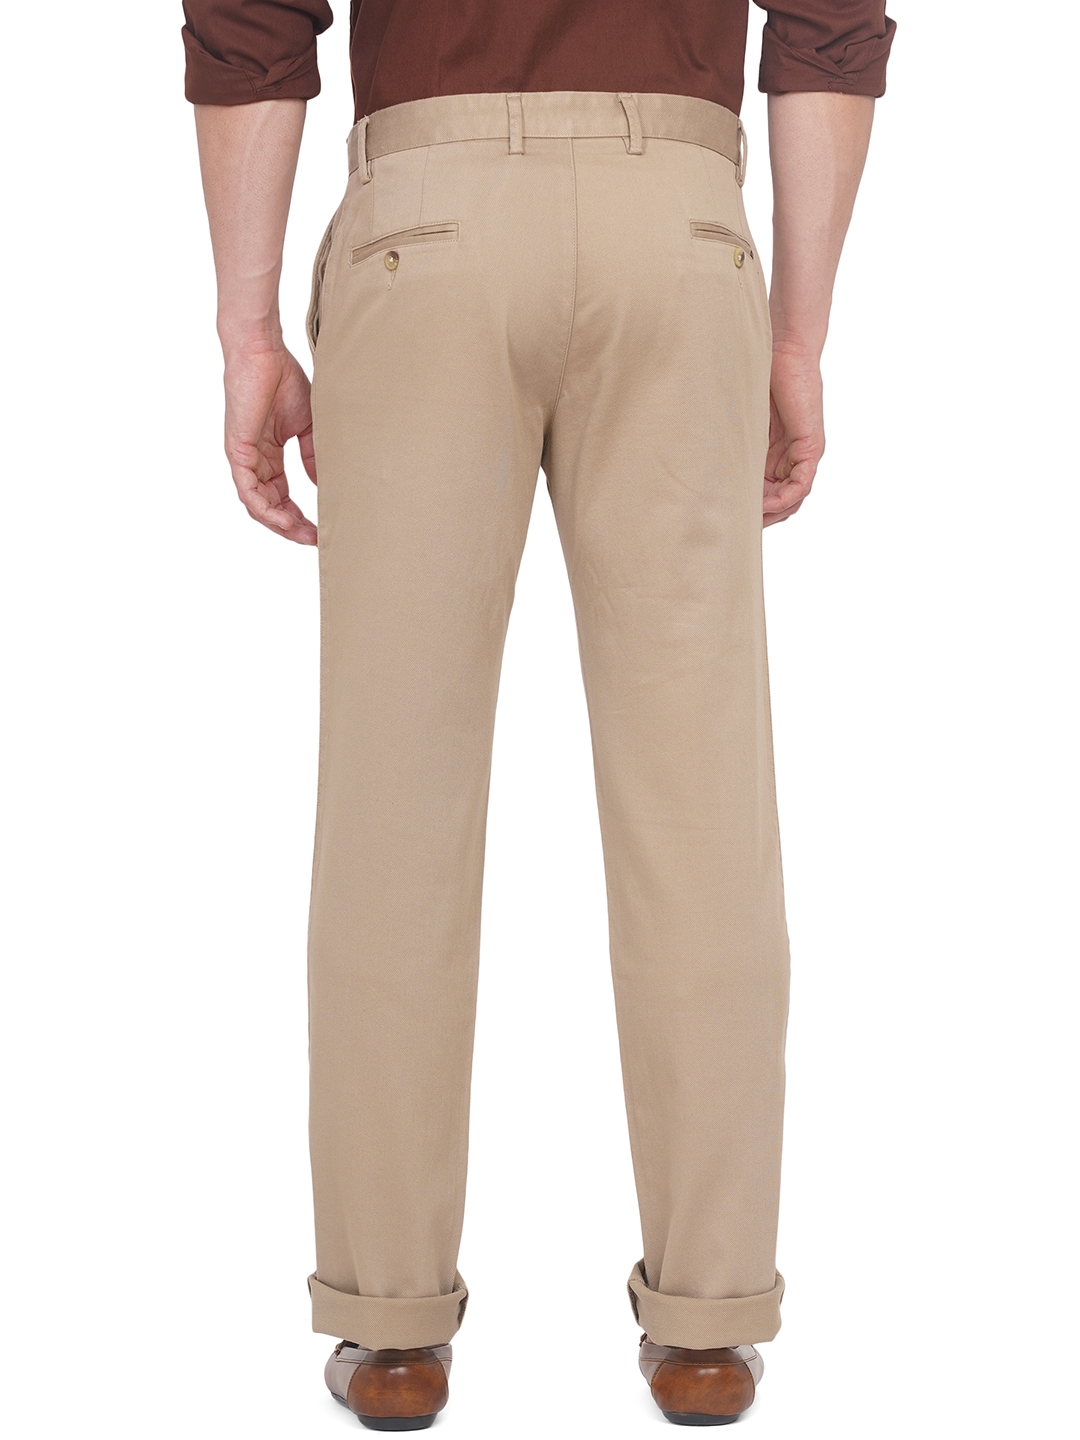 Greenfibre | Light Khaki Solid Slim Fit Casual Trouser | Greenfibre 2